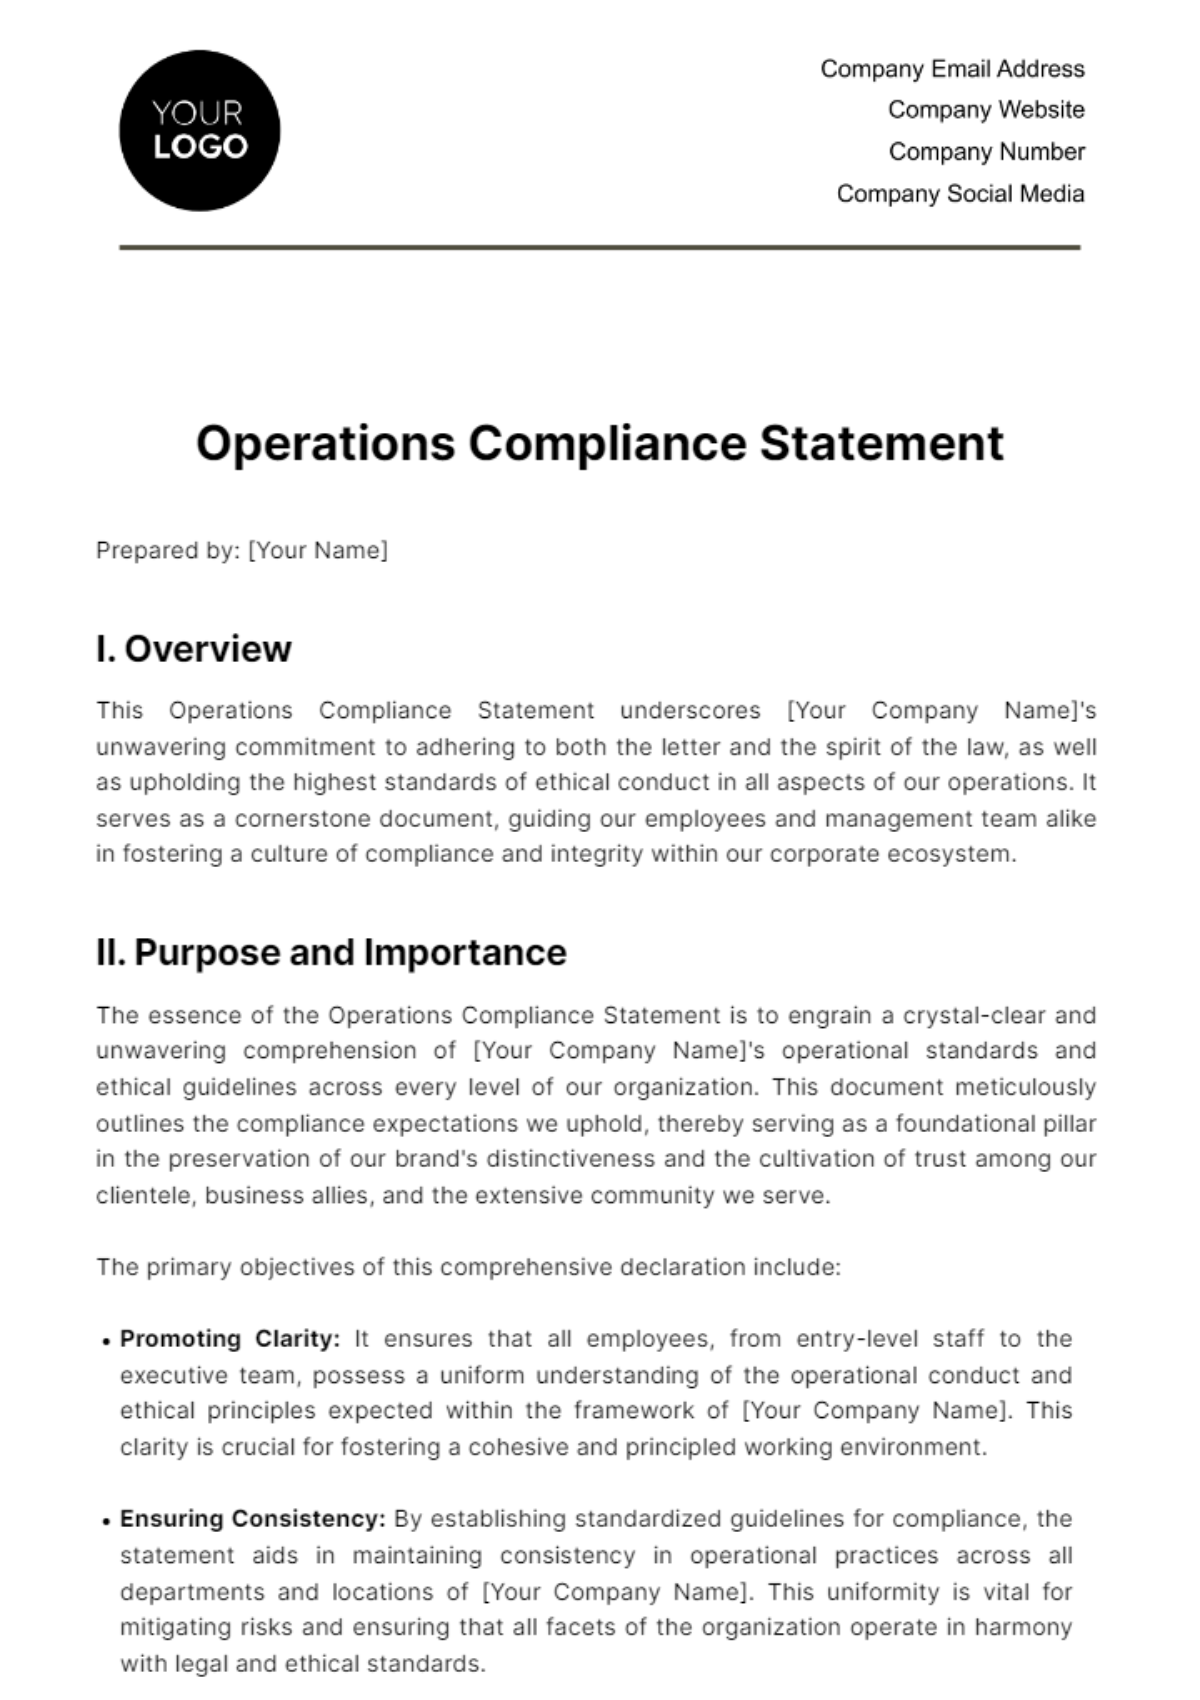 Free Operations Compliance Statement Template